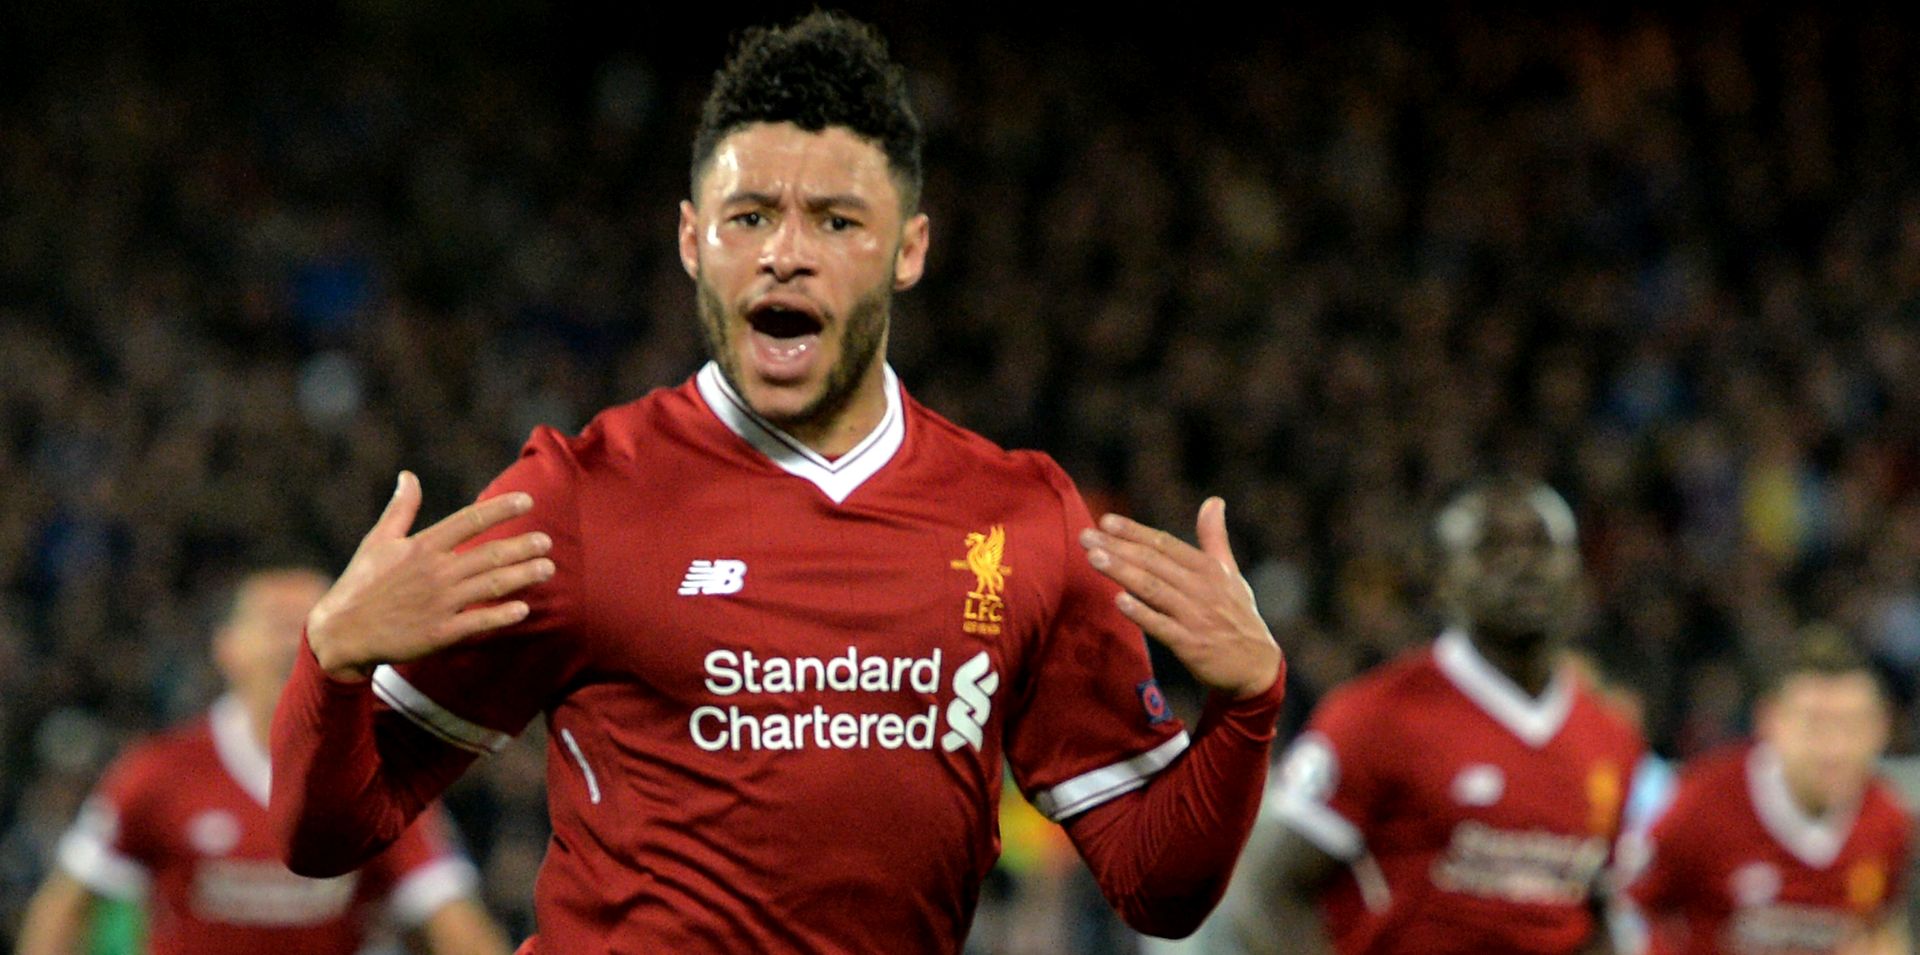 epa06645857 Liverpool's Alex Oxlade-Chamberlain celebrates after scoring the 2-0 lead during the UEFA Champions League quarter final first leg match between FC Liverpool and Manchester City at Anfield Road, Liverpool, Britain, 04 April 2018.  EPA/PETER POWELL